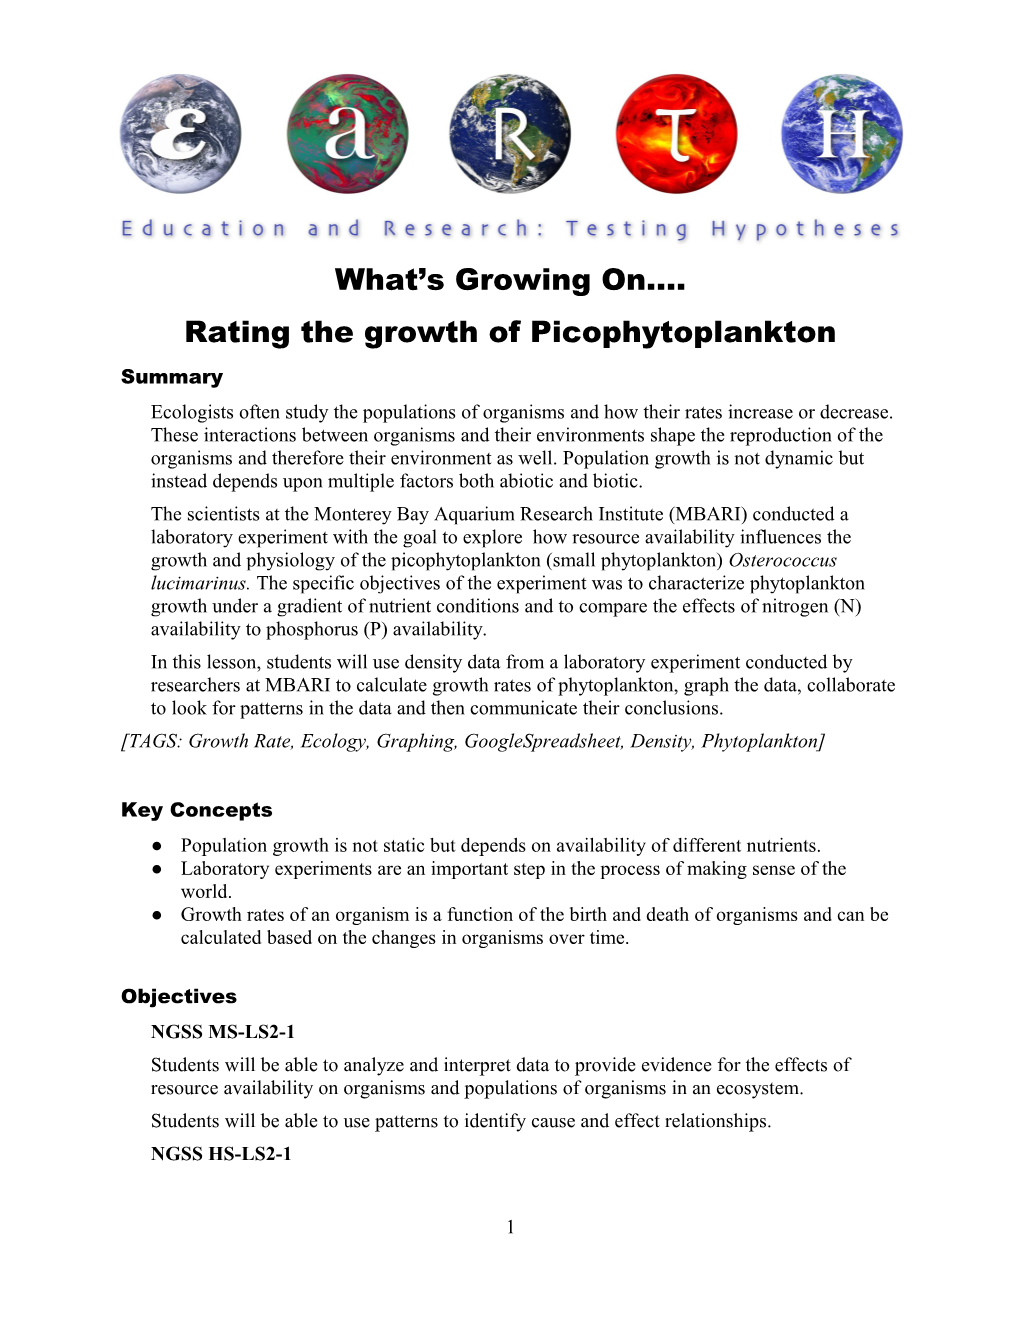 Rating the Growth of Picophytoplankton